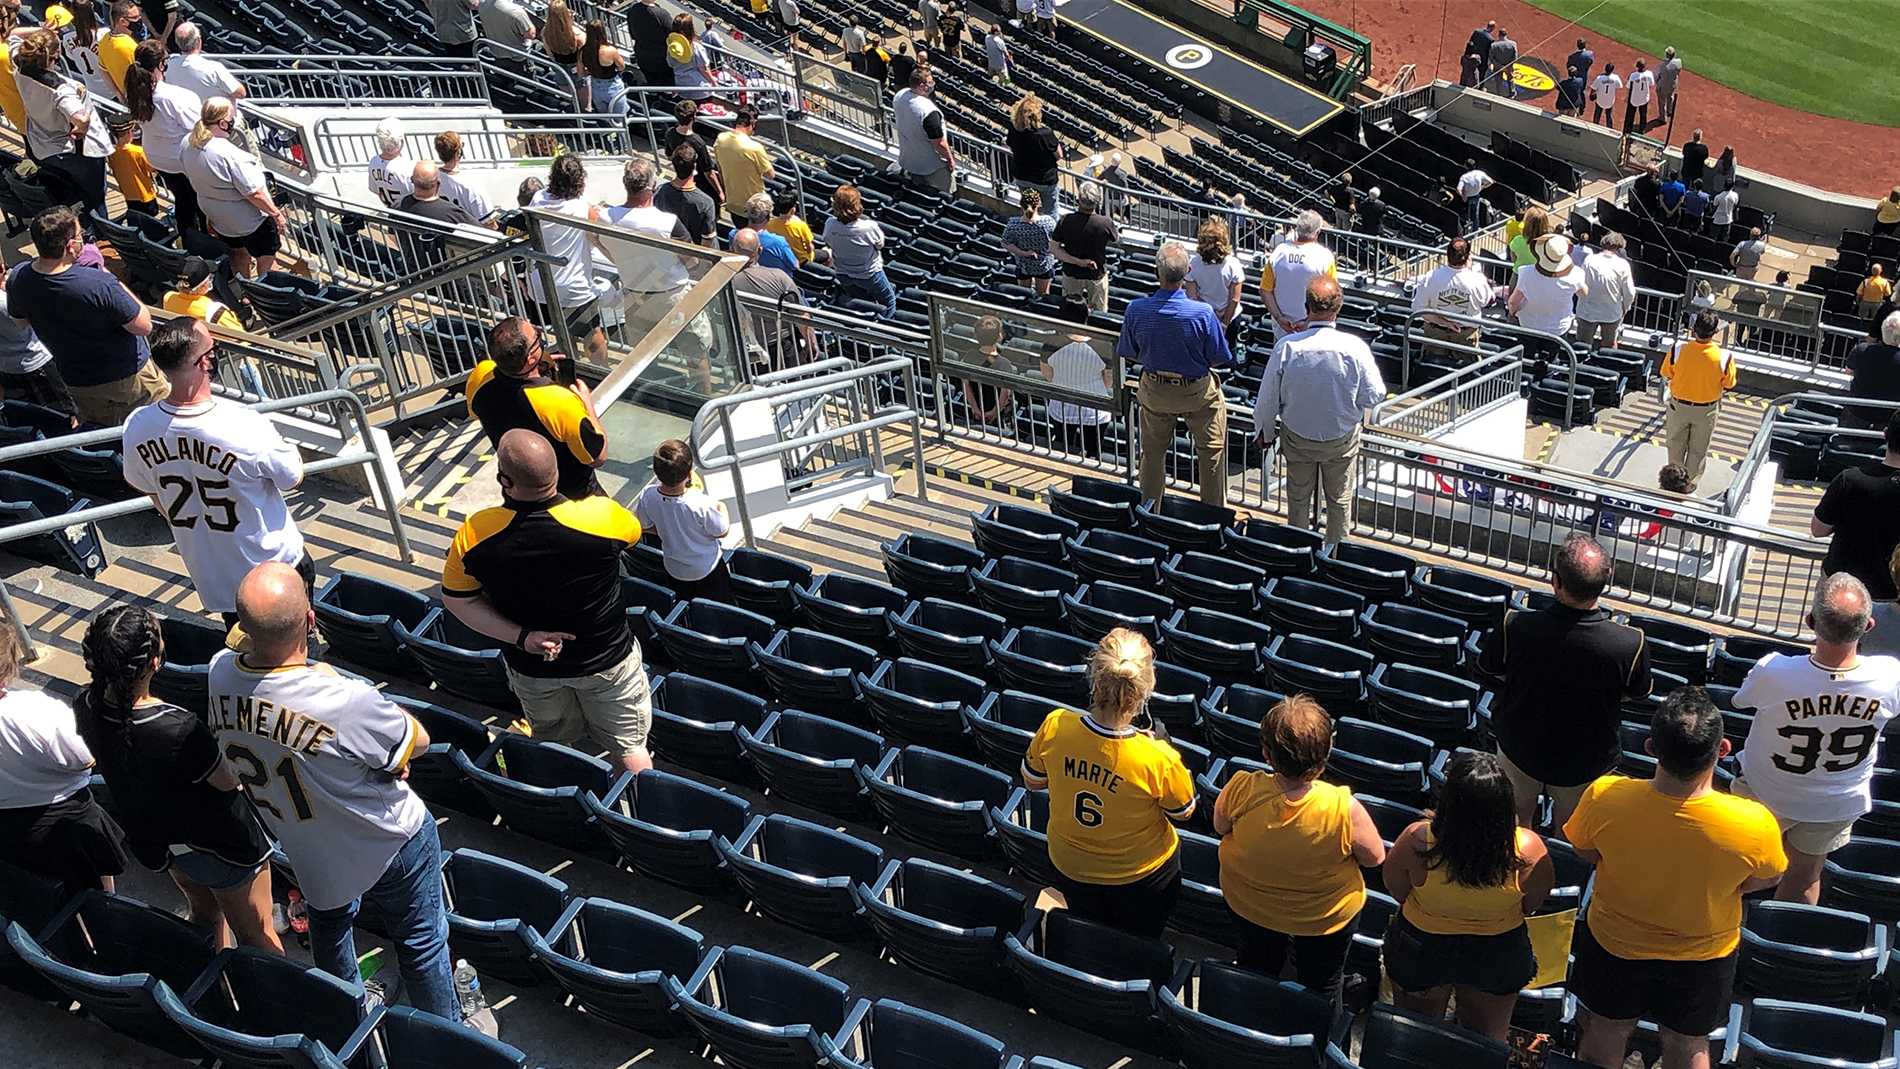 Nothing beats sitting in these seats': Pirates fans celebrate start of  're-opening weekend' at PNC Park